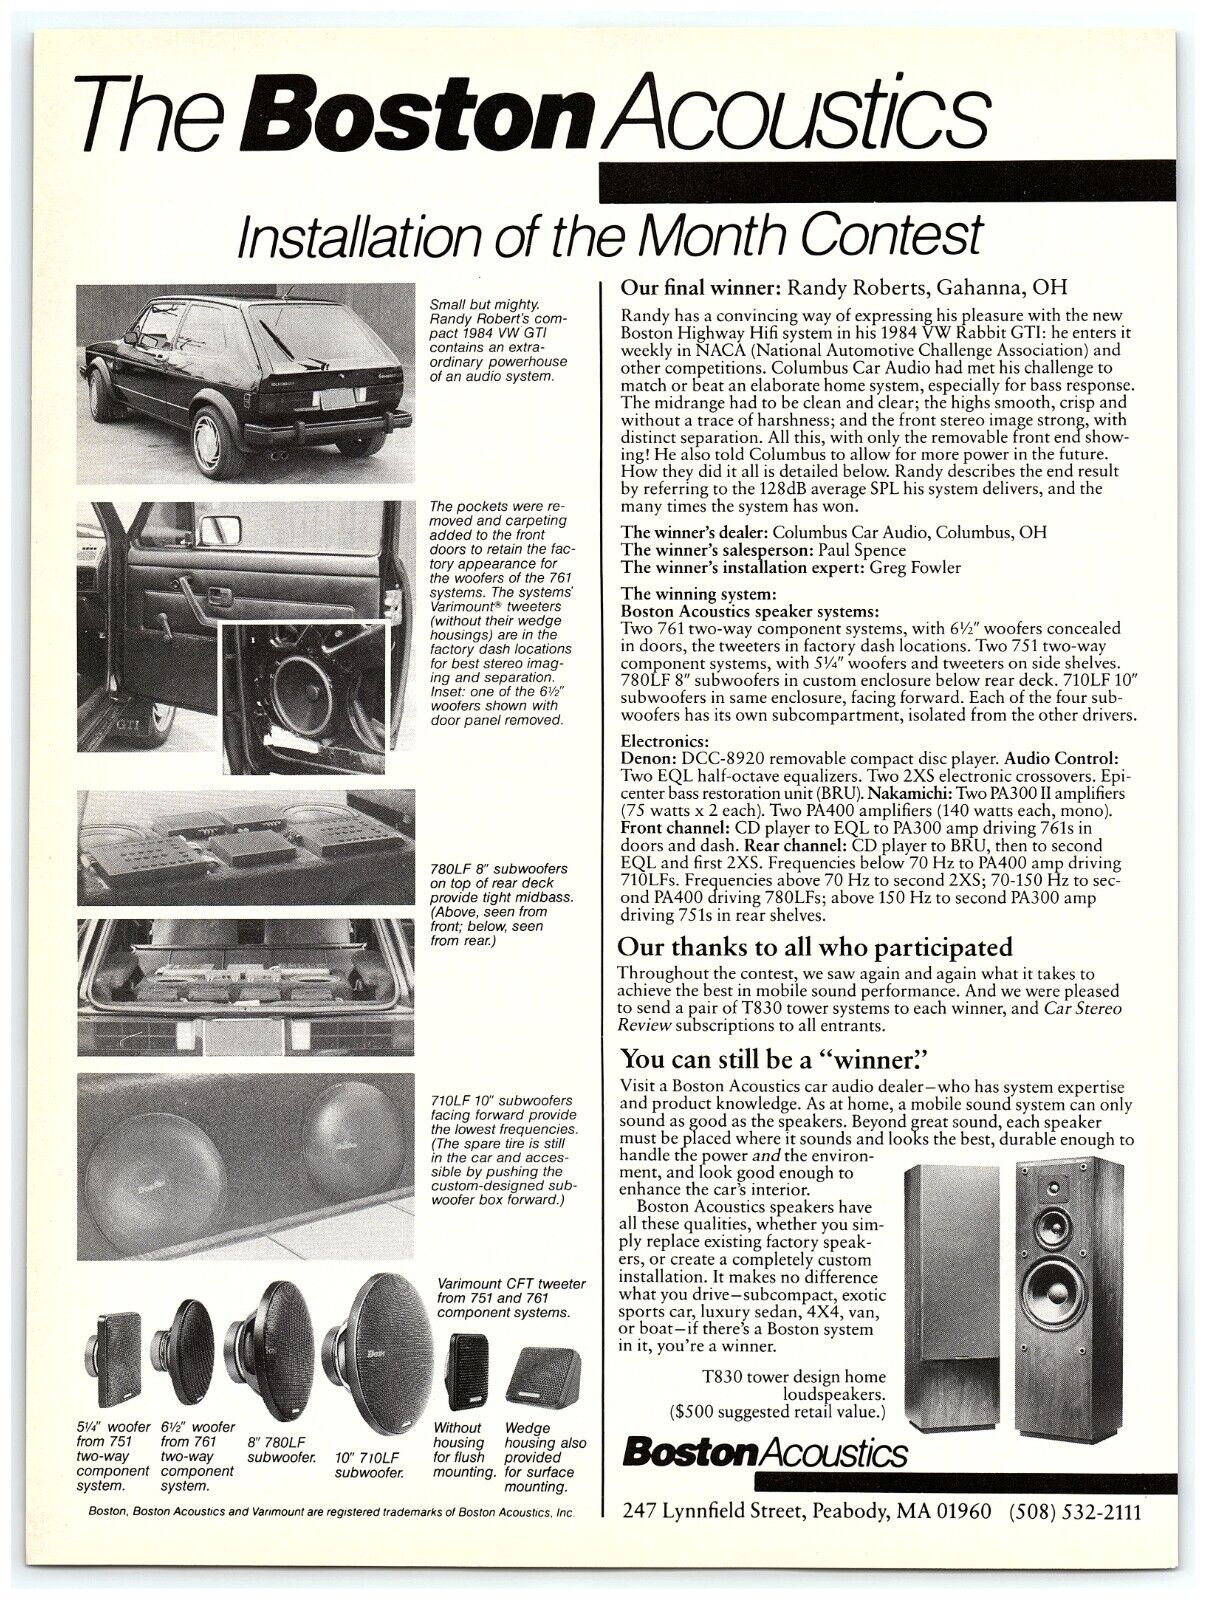 1988 Boston Acoustics Speakers Print Ad Installation of the Month Contest Winner